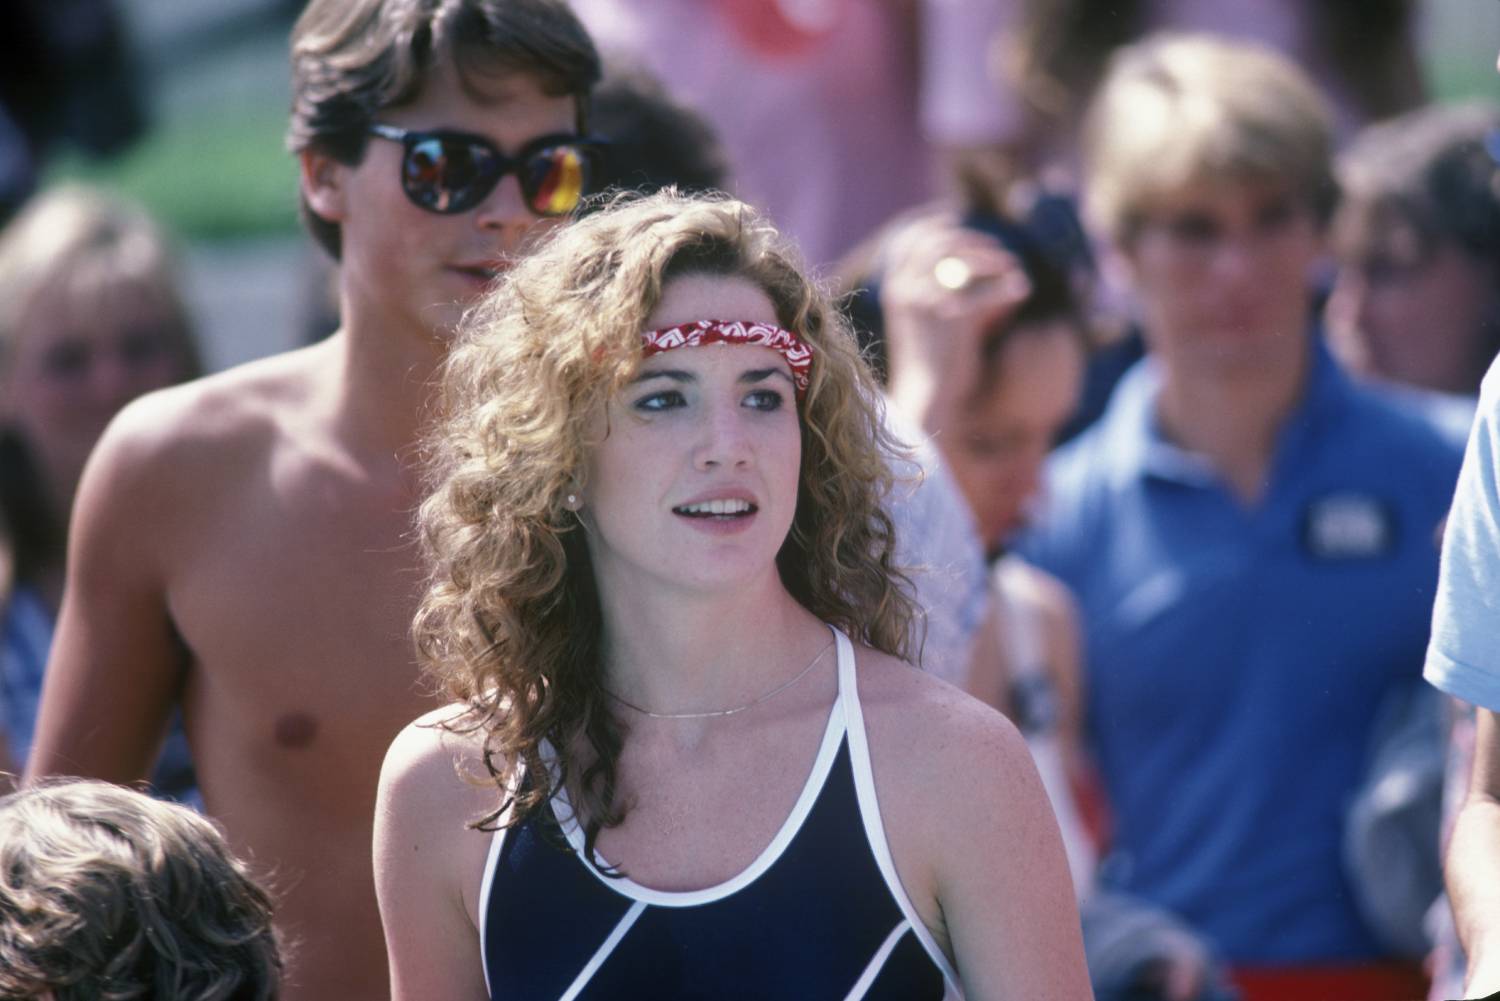 Melissa Gilbert wearing a red headband and a black and white top.